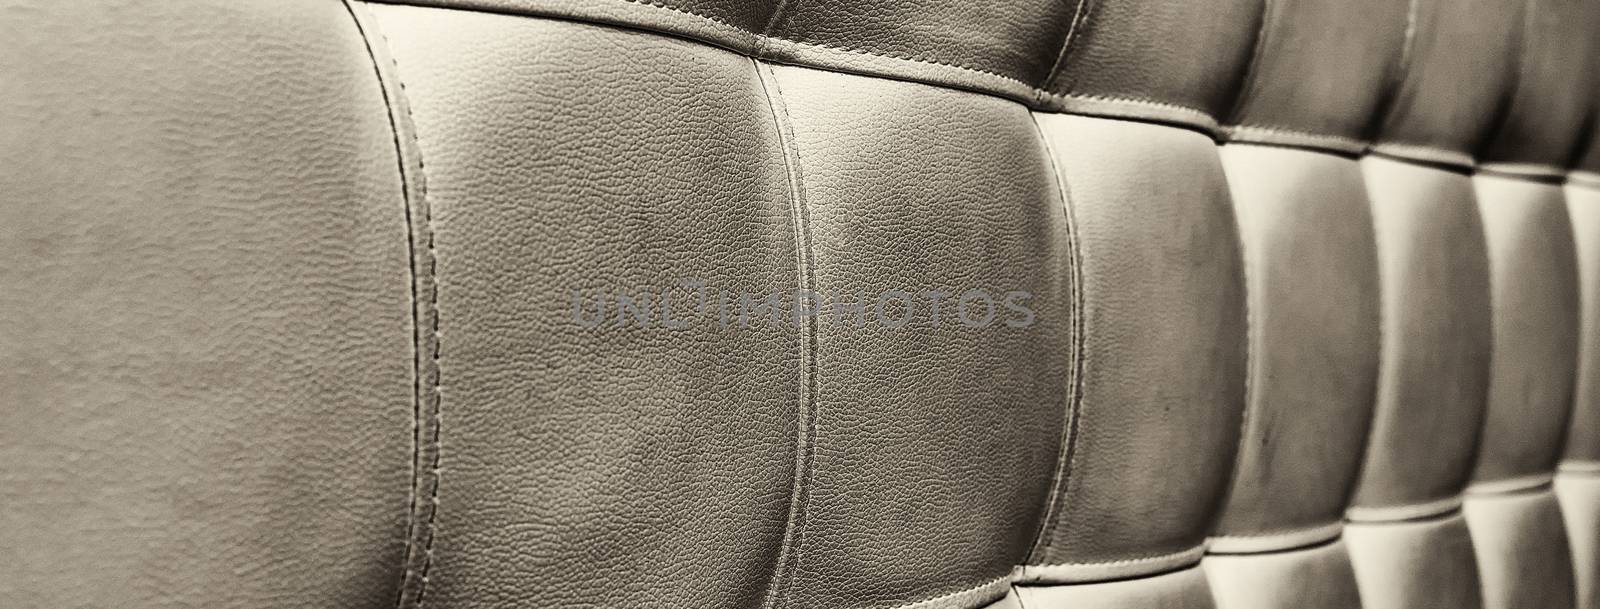 Tufted grey leather headboard texture for background by marcorubino